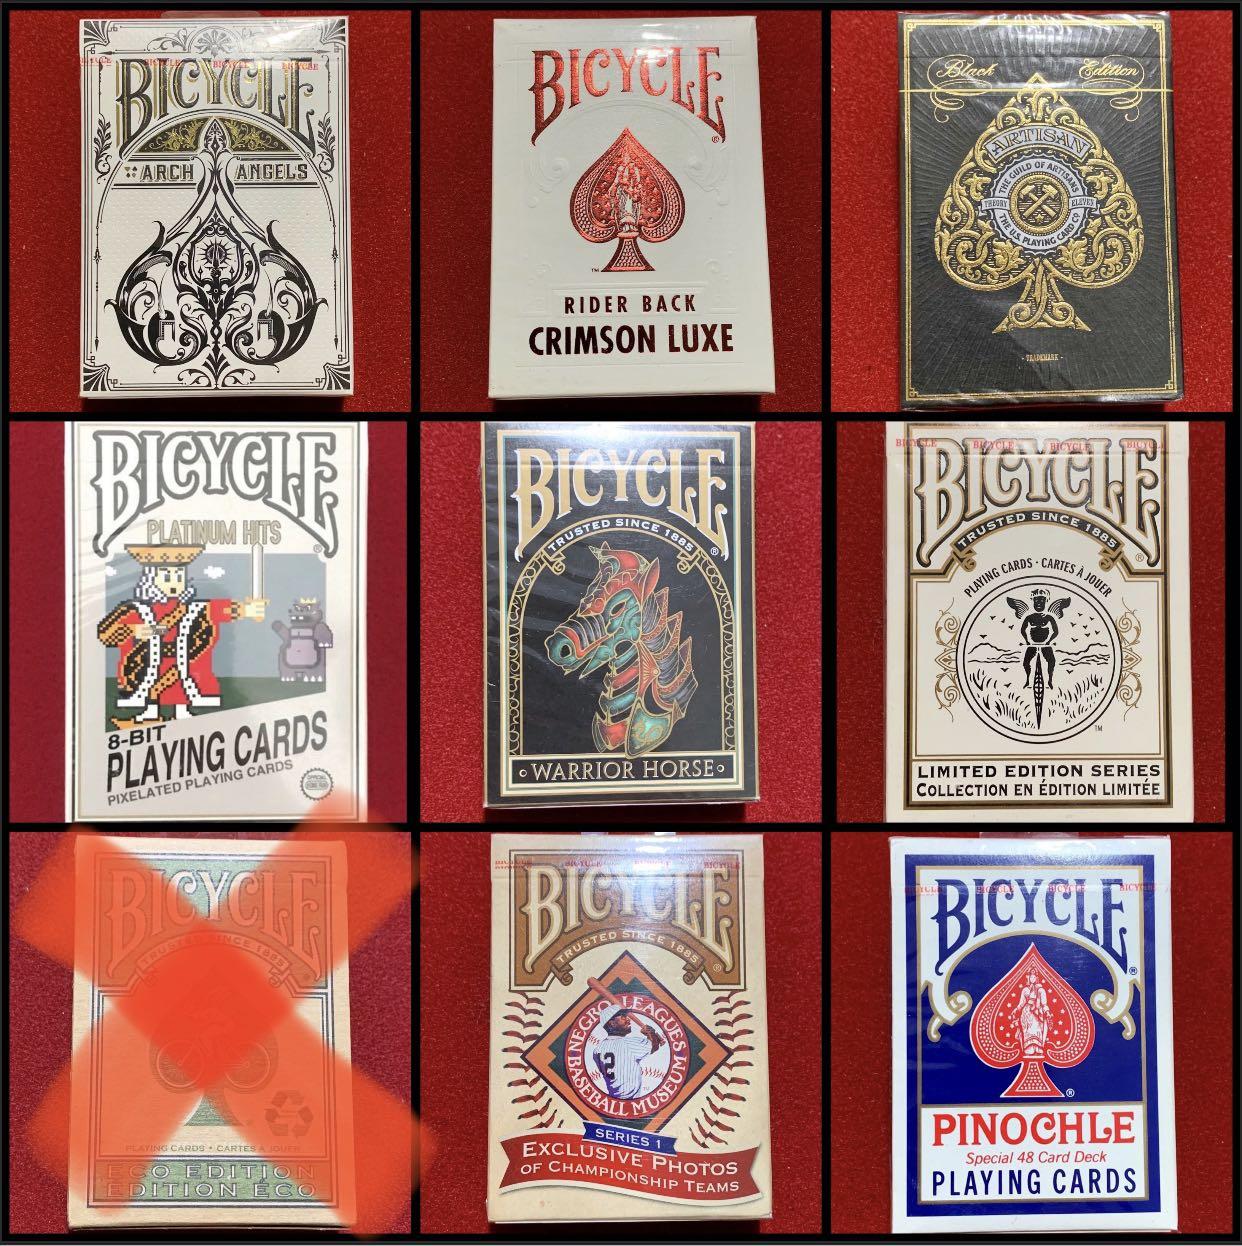  Bicycle Eco Edition Playing Cards : Toys & Games